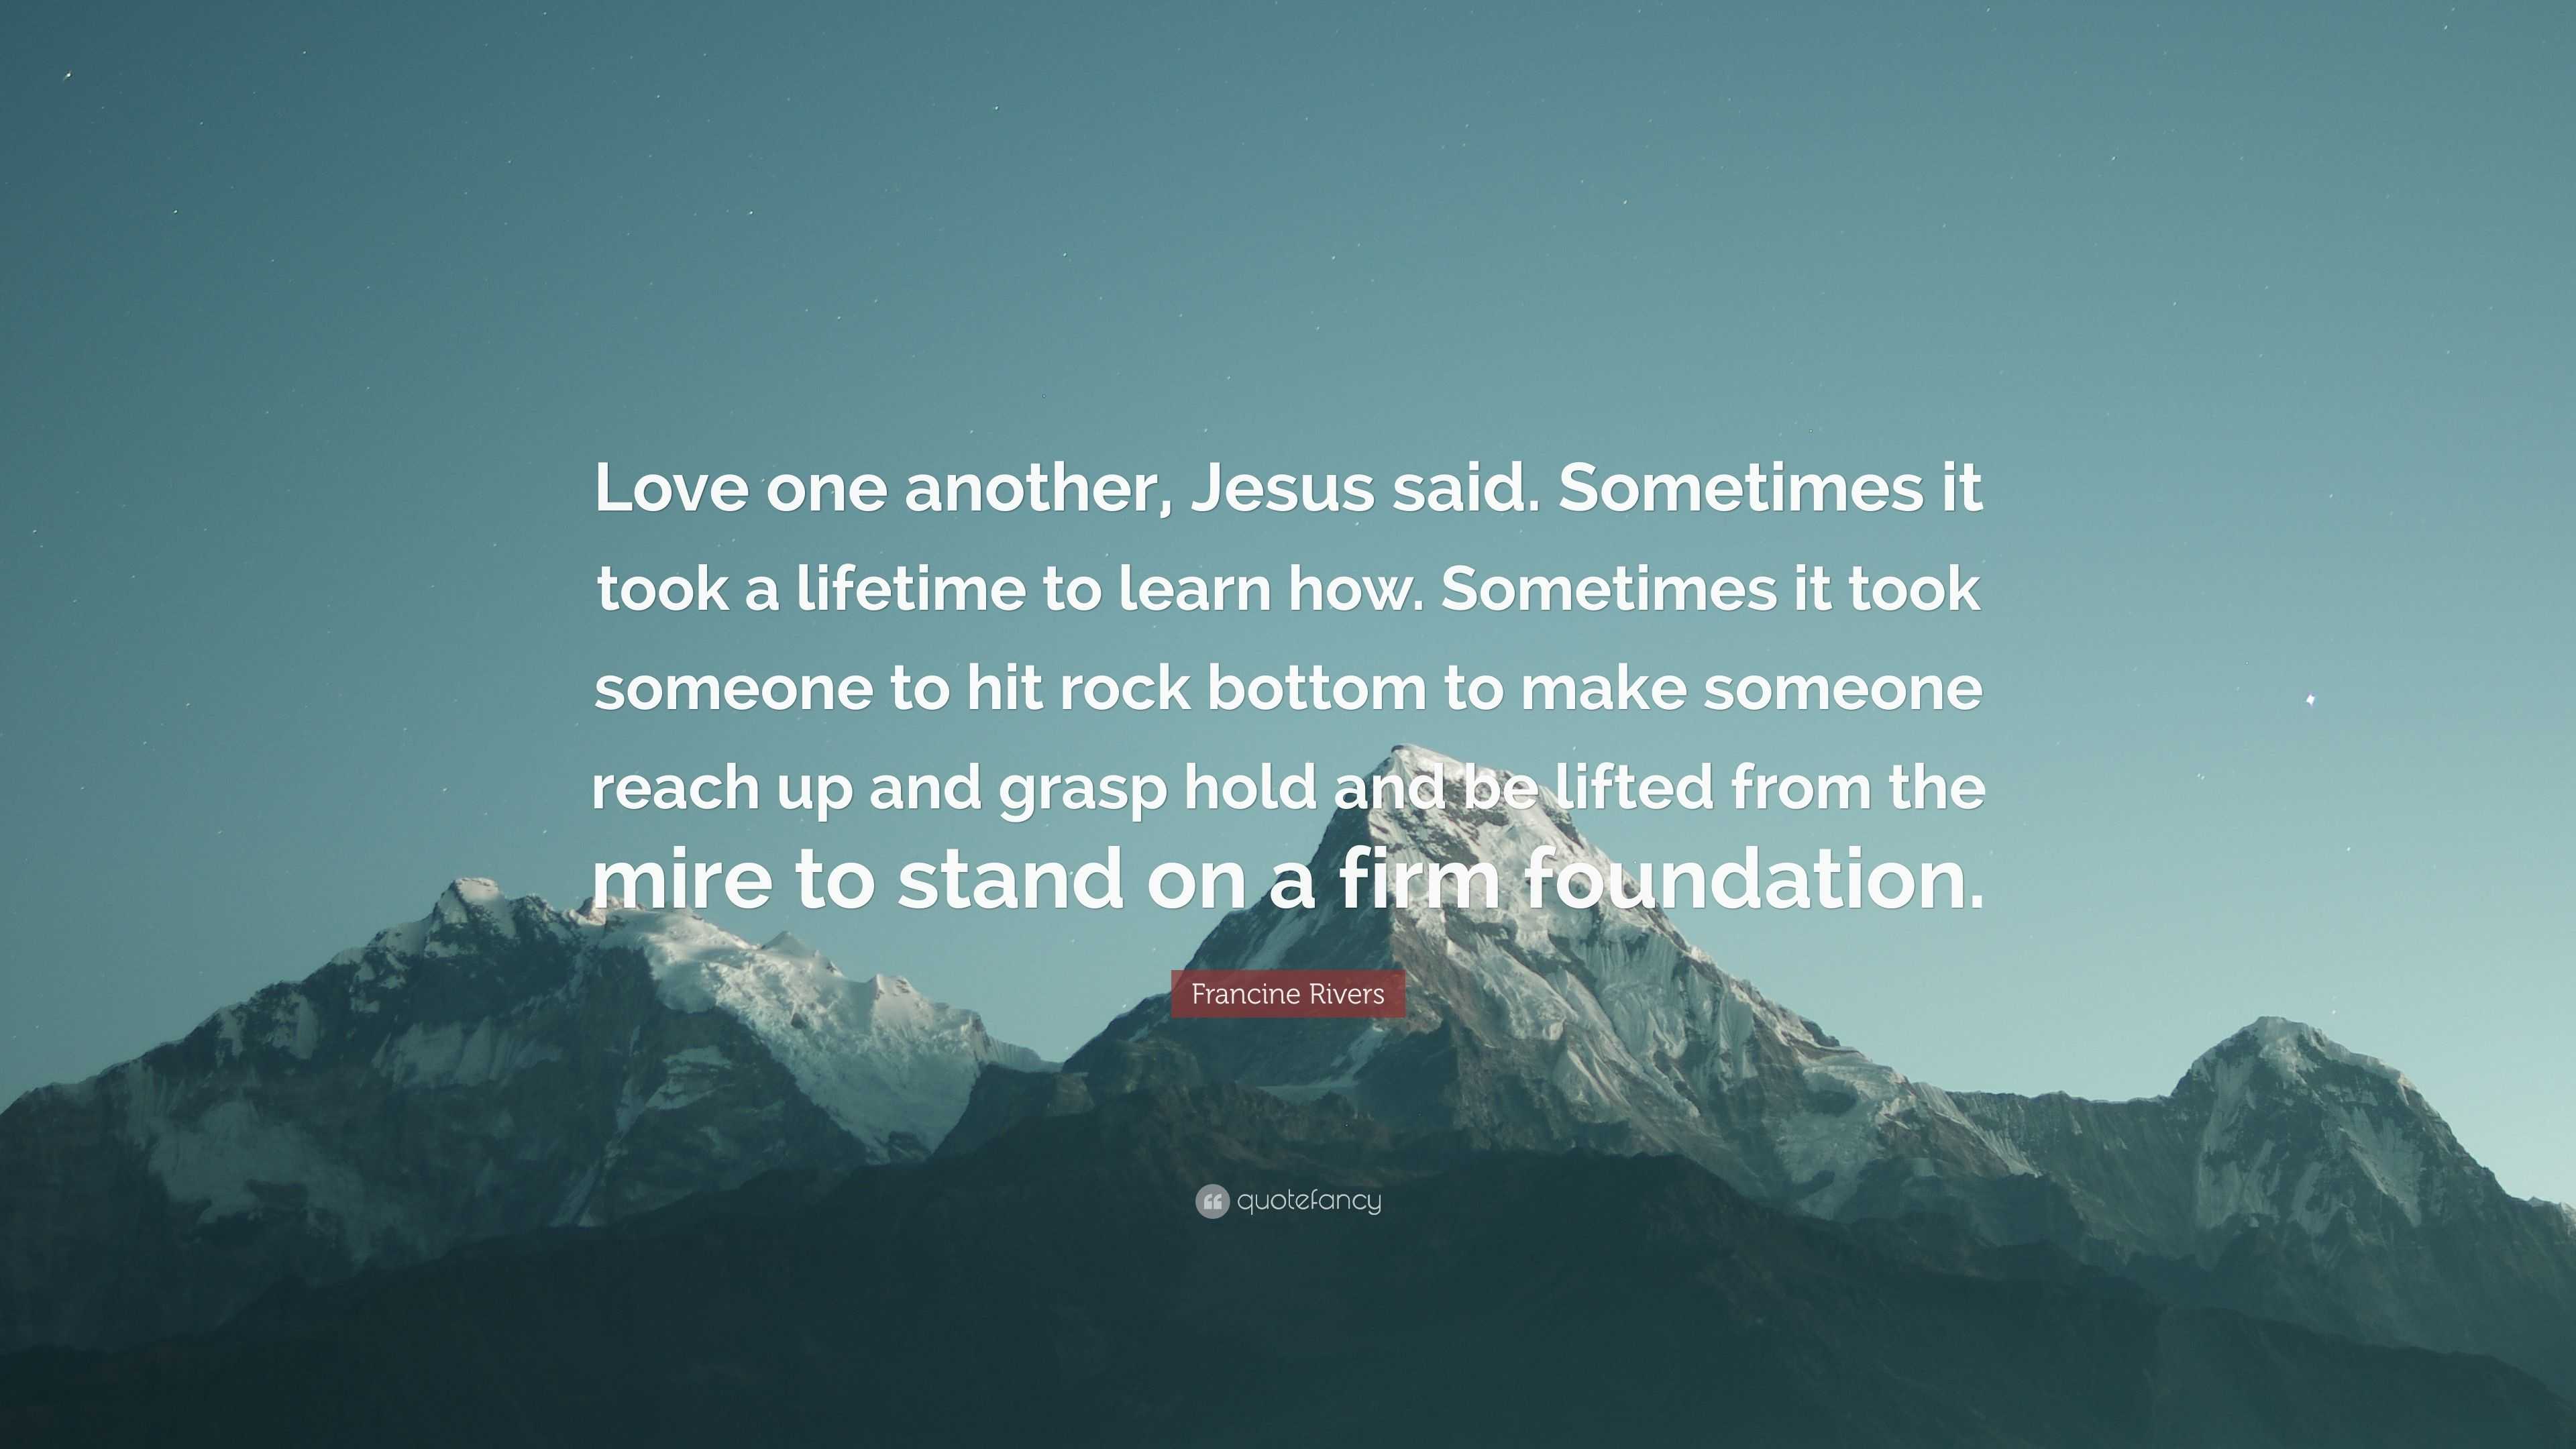 Francine Rivers Quote “Love one another Jesus said Sometimes it took a